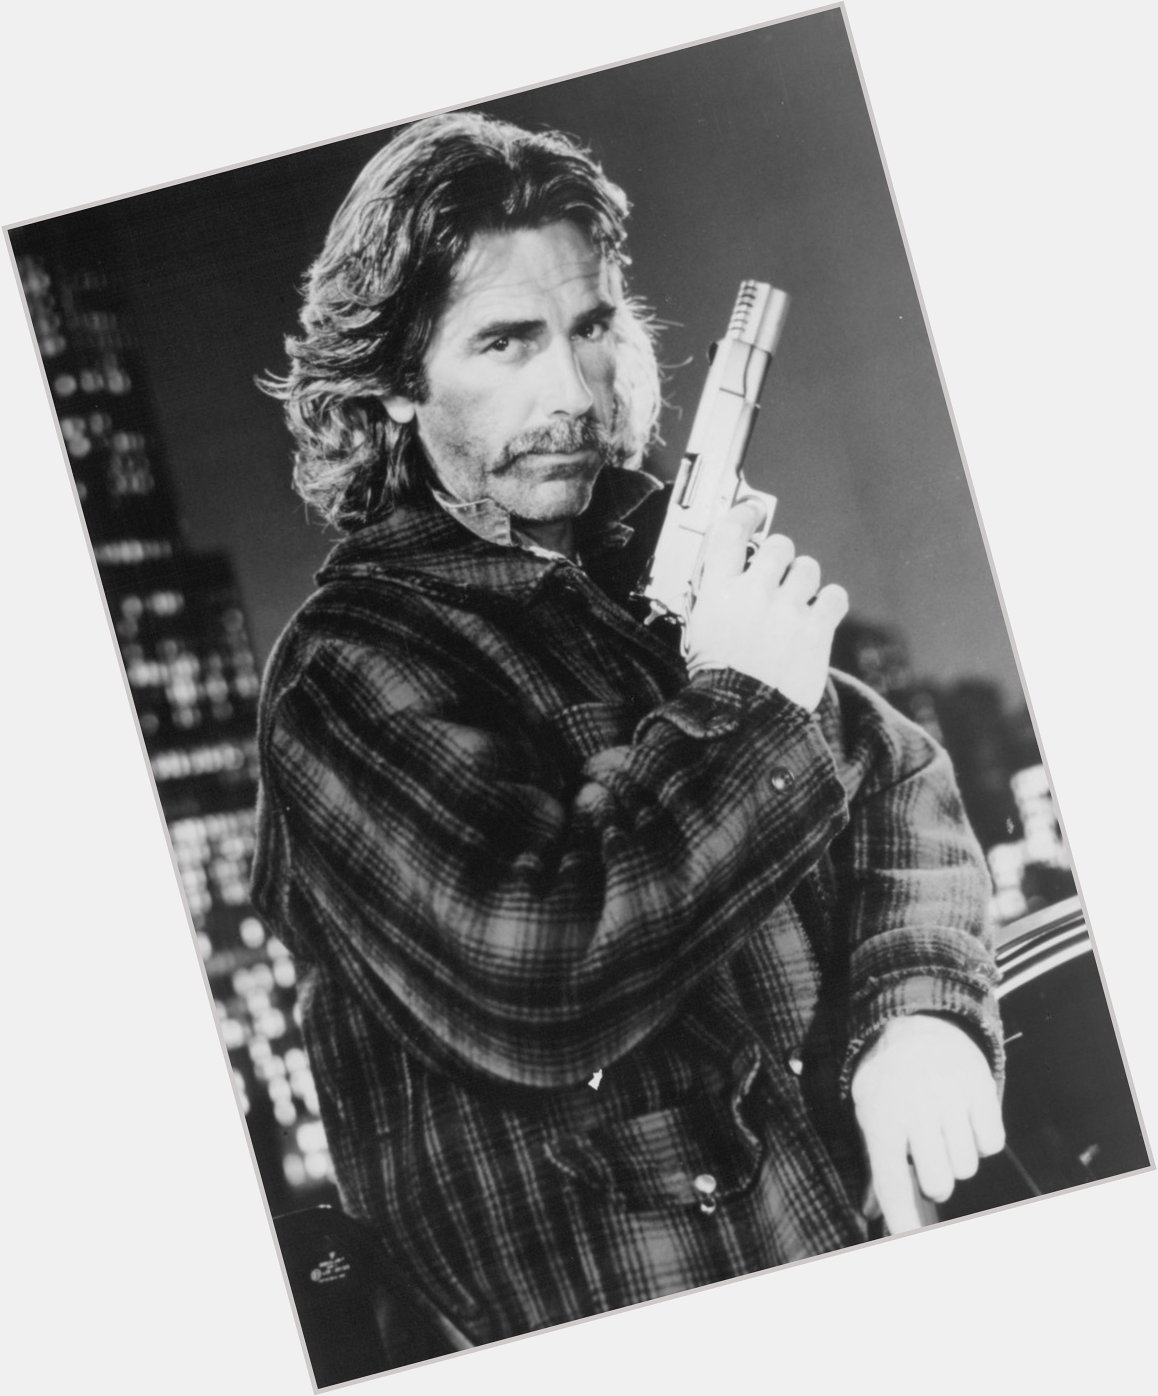 Happy 78th birthday to the one and only Sam Elliott! 